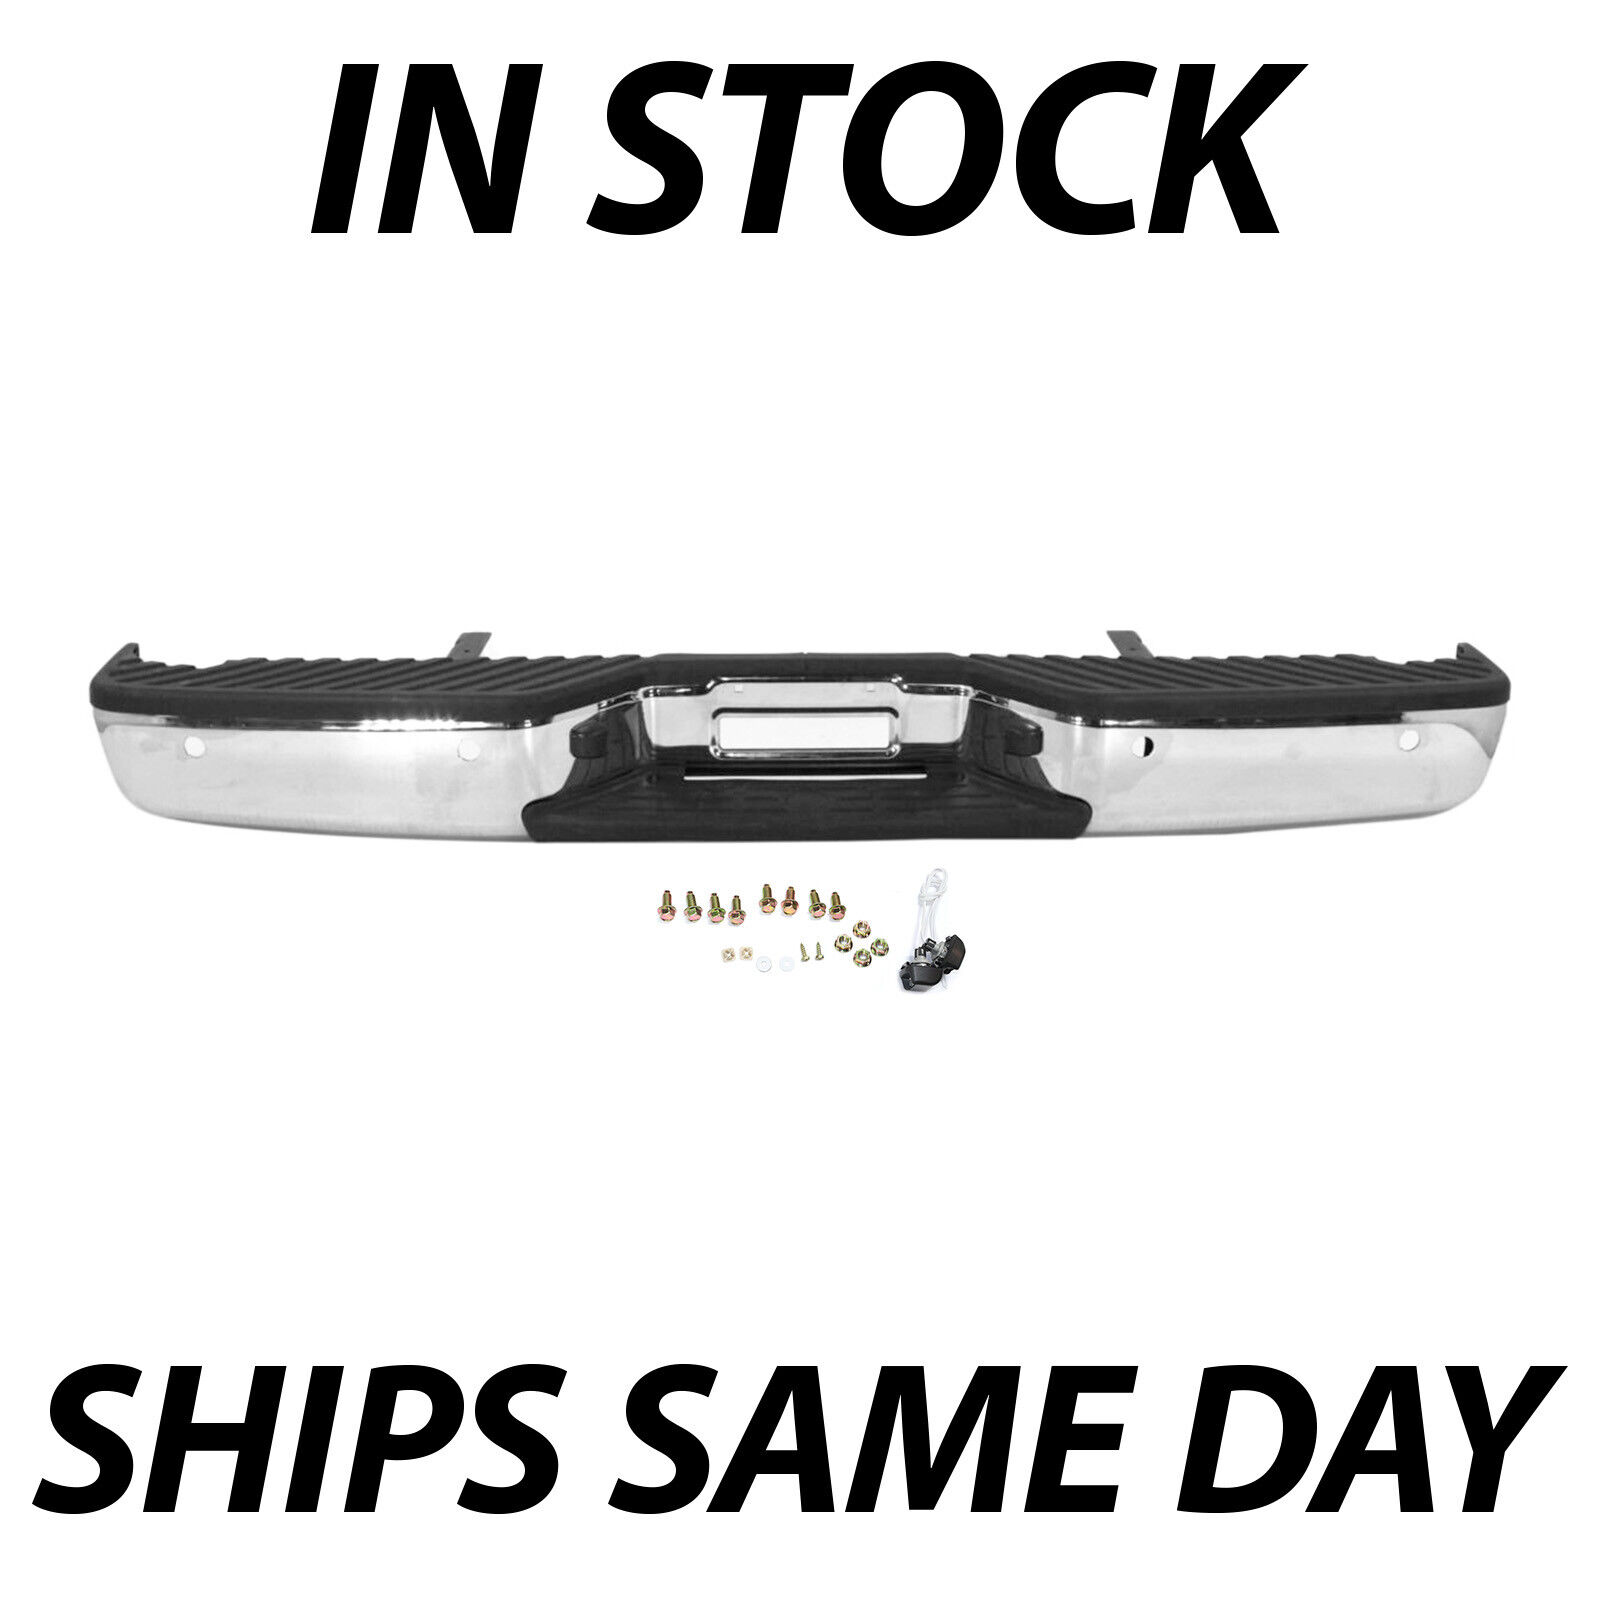 NEW Steel - Chrome Rear Step Bumper Assembly for 2004-2014 Nissan Titan W/ Park